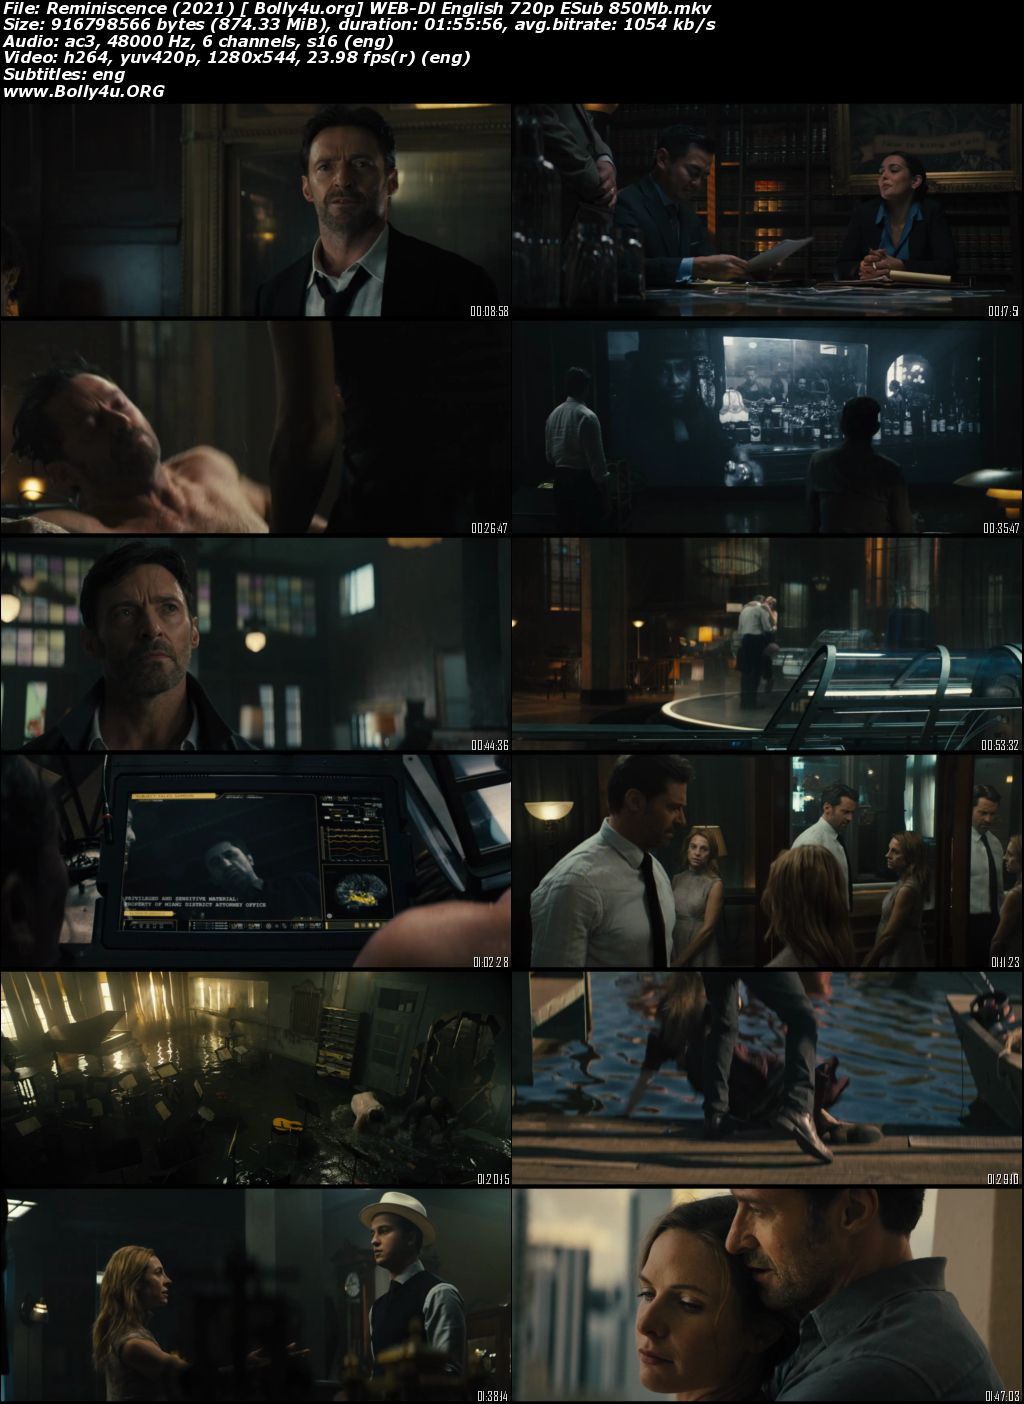 Reminiscence 2021 WEB-DL 850Mb English 720p ESubs Download